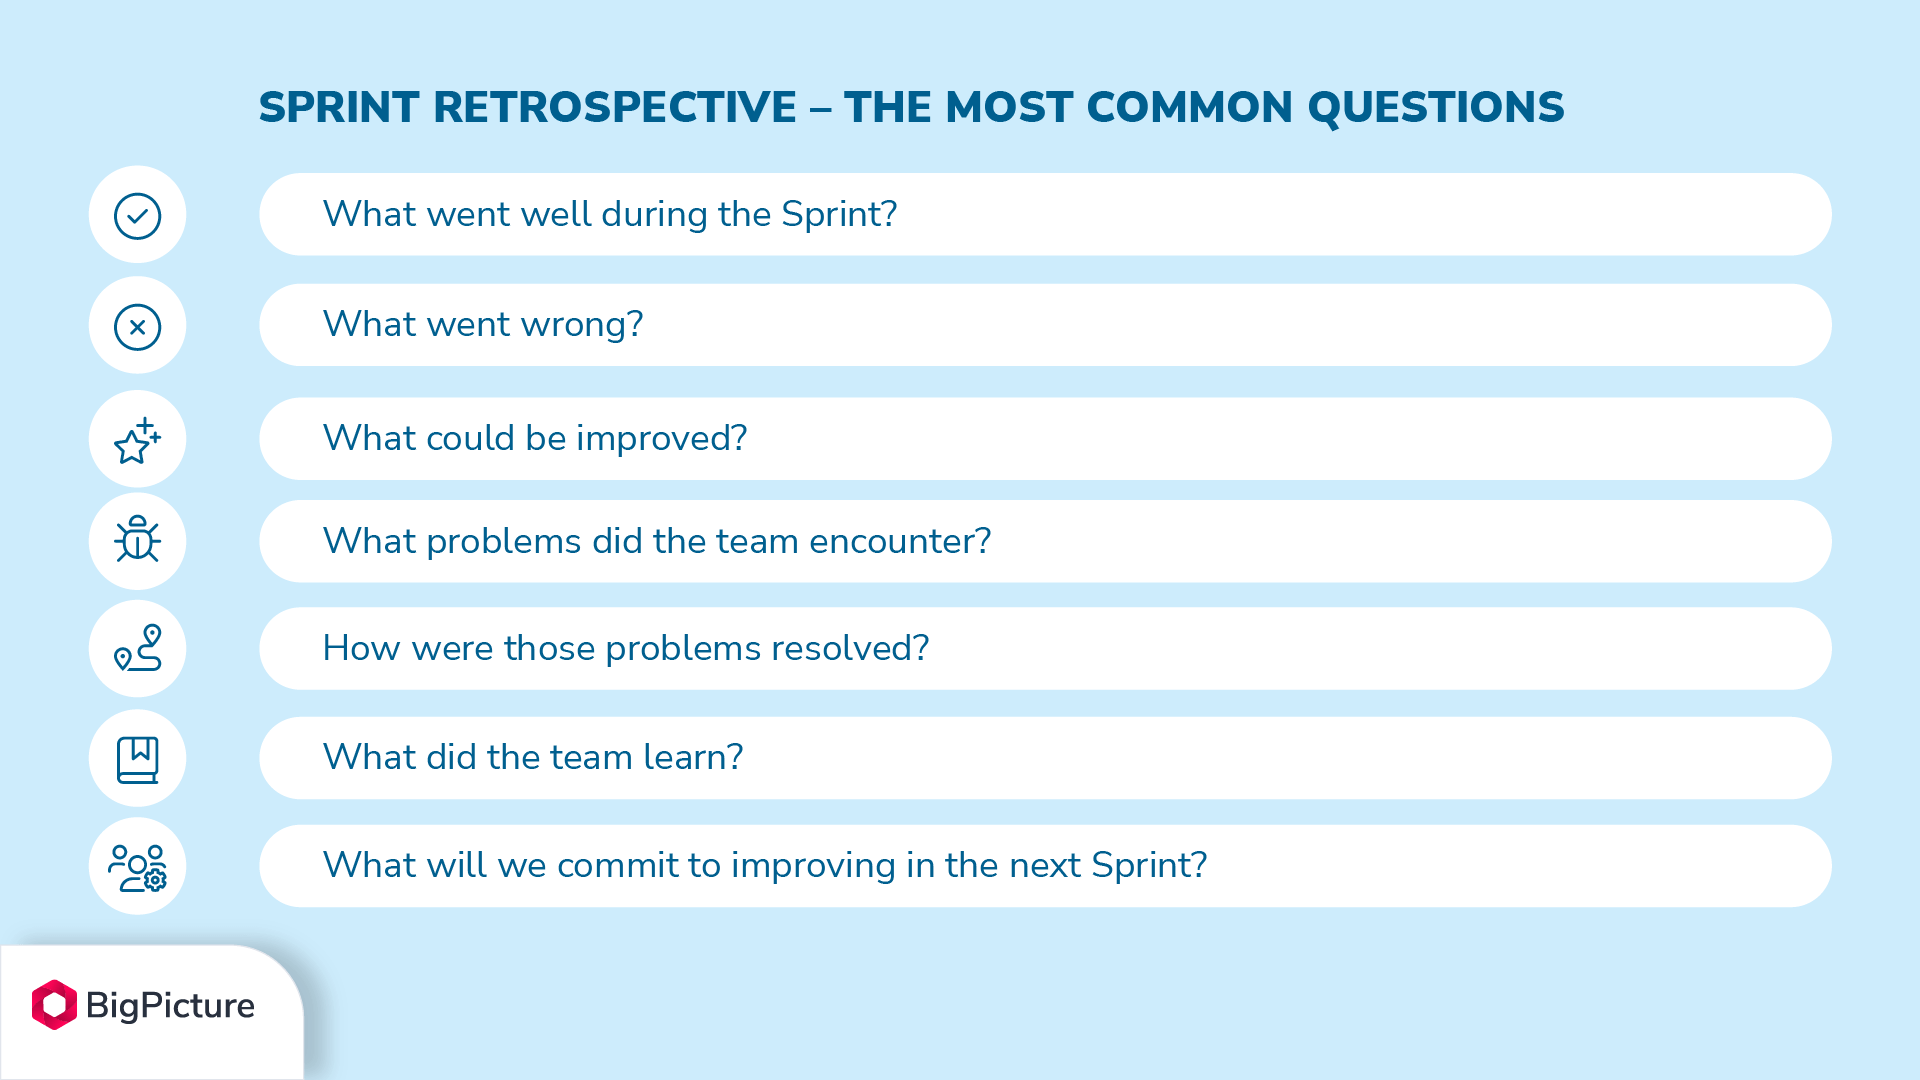 Sprint Review – Most common questions